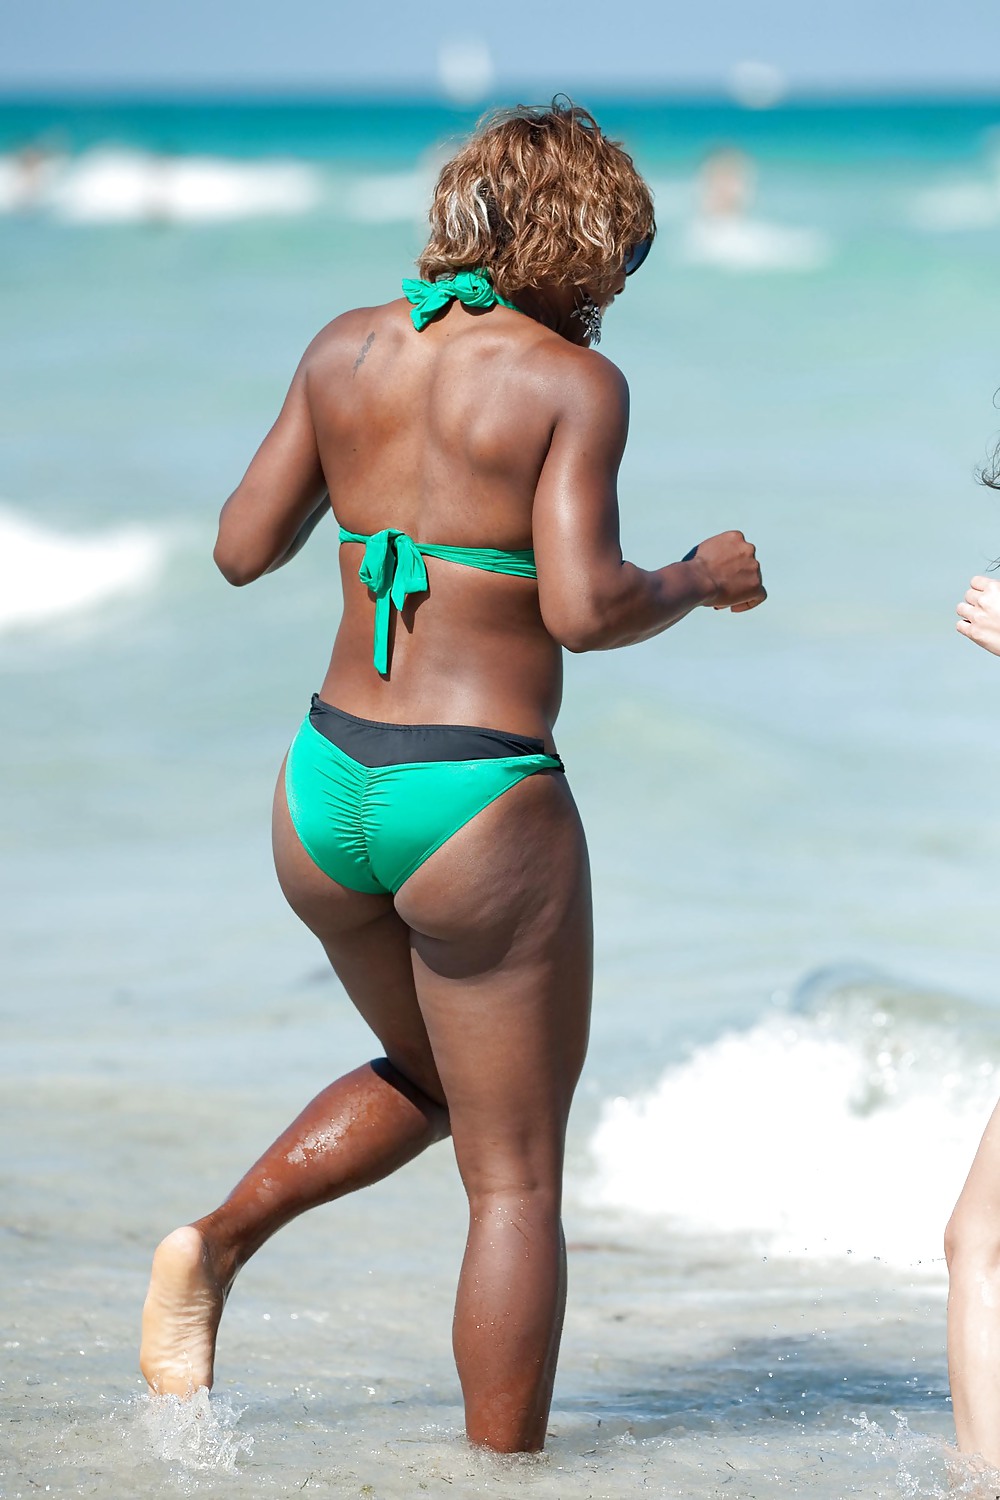 Serena williams monster ass and boobs on the beach in miami
 #3191510